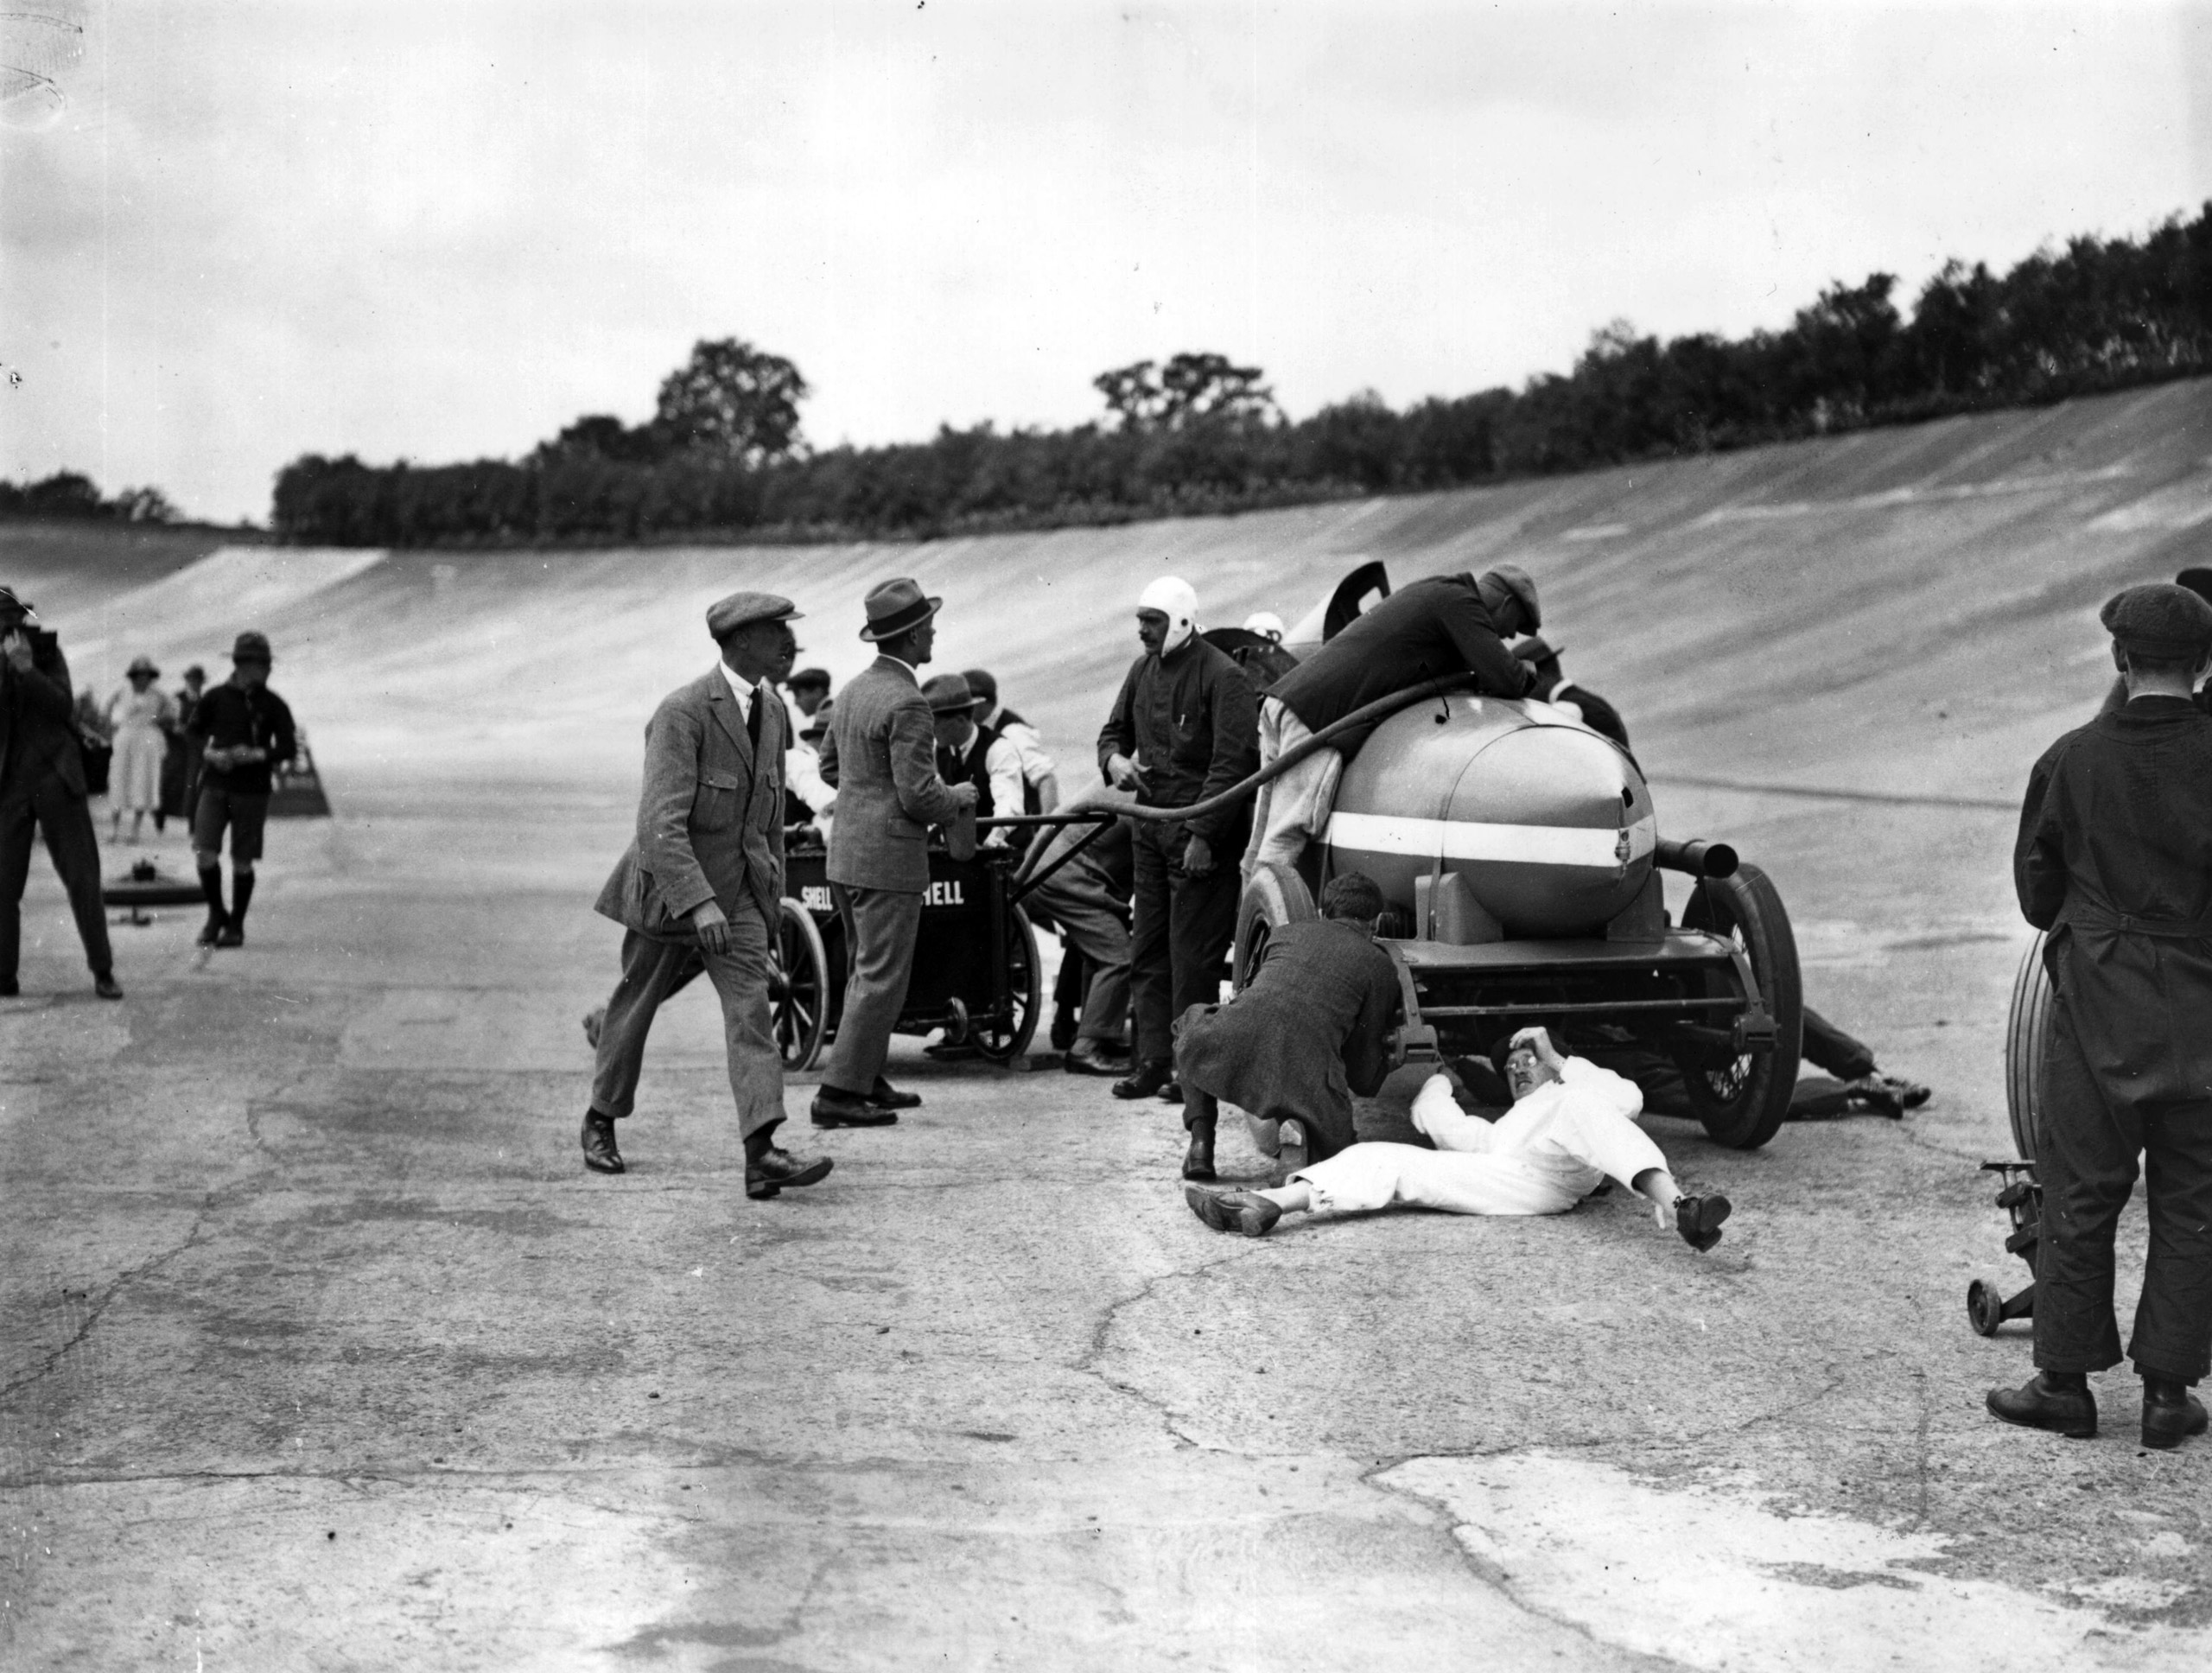 Filling up a Spyker car during a record breaking run by Selwyn F Edge on the Brooklands circuit. Edge averaged 74.27 mph in his Maybach engined Spyker to beat  his own previous 24 hour record set up in 1907. July 1922.